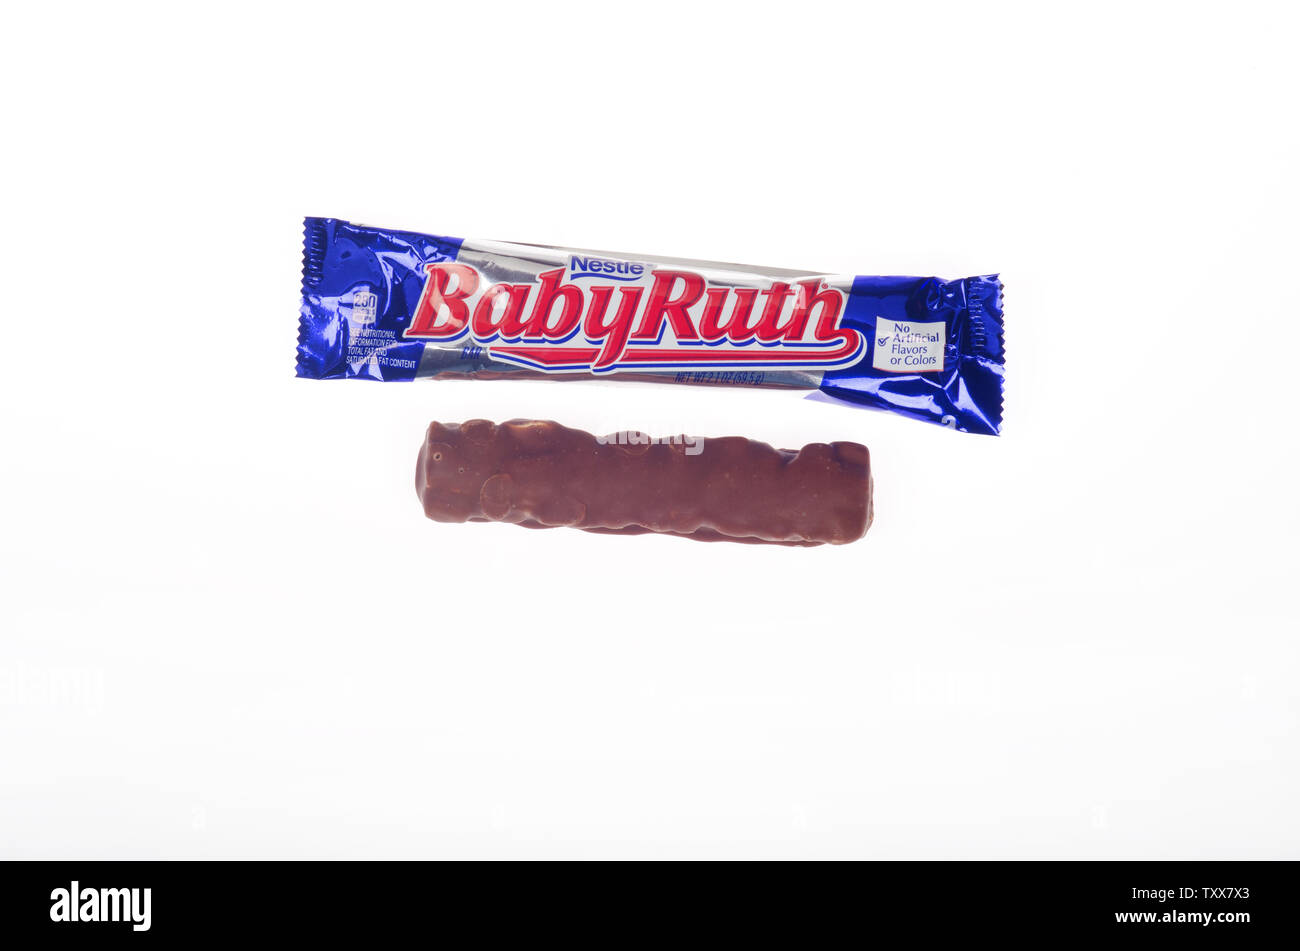 Nestle Baby Ruth candy bar opened & unwrapped Stock Photo